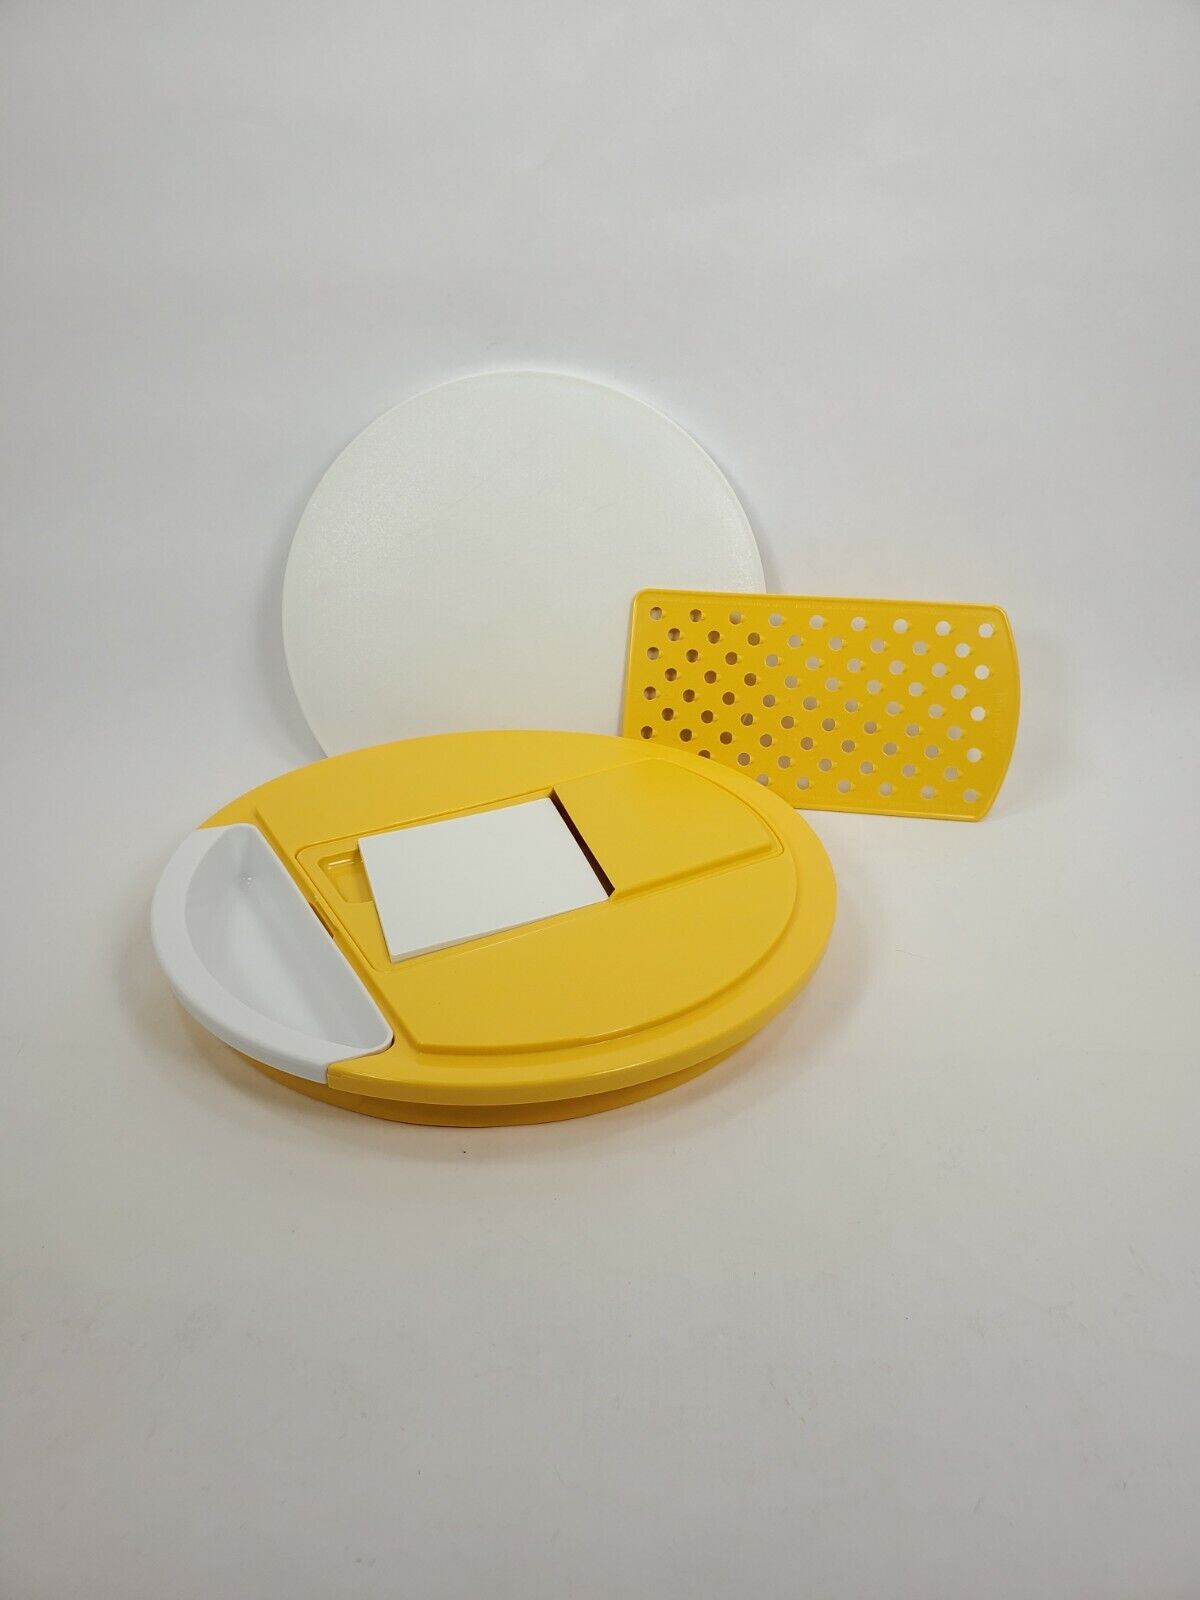 Vintage Tupperware Yellow 1980s Grater Cutting Board Slicer Set #1849 1851-53